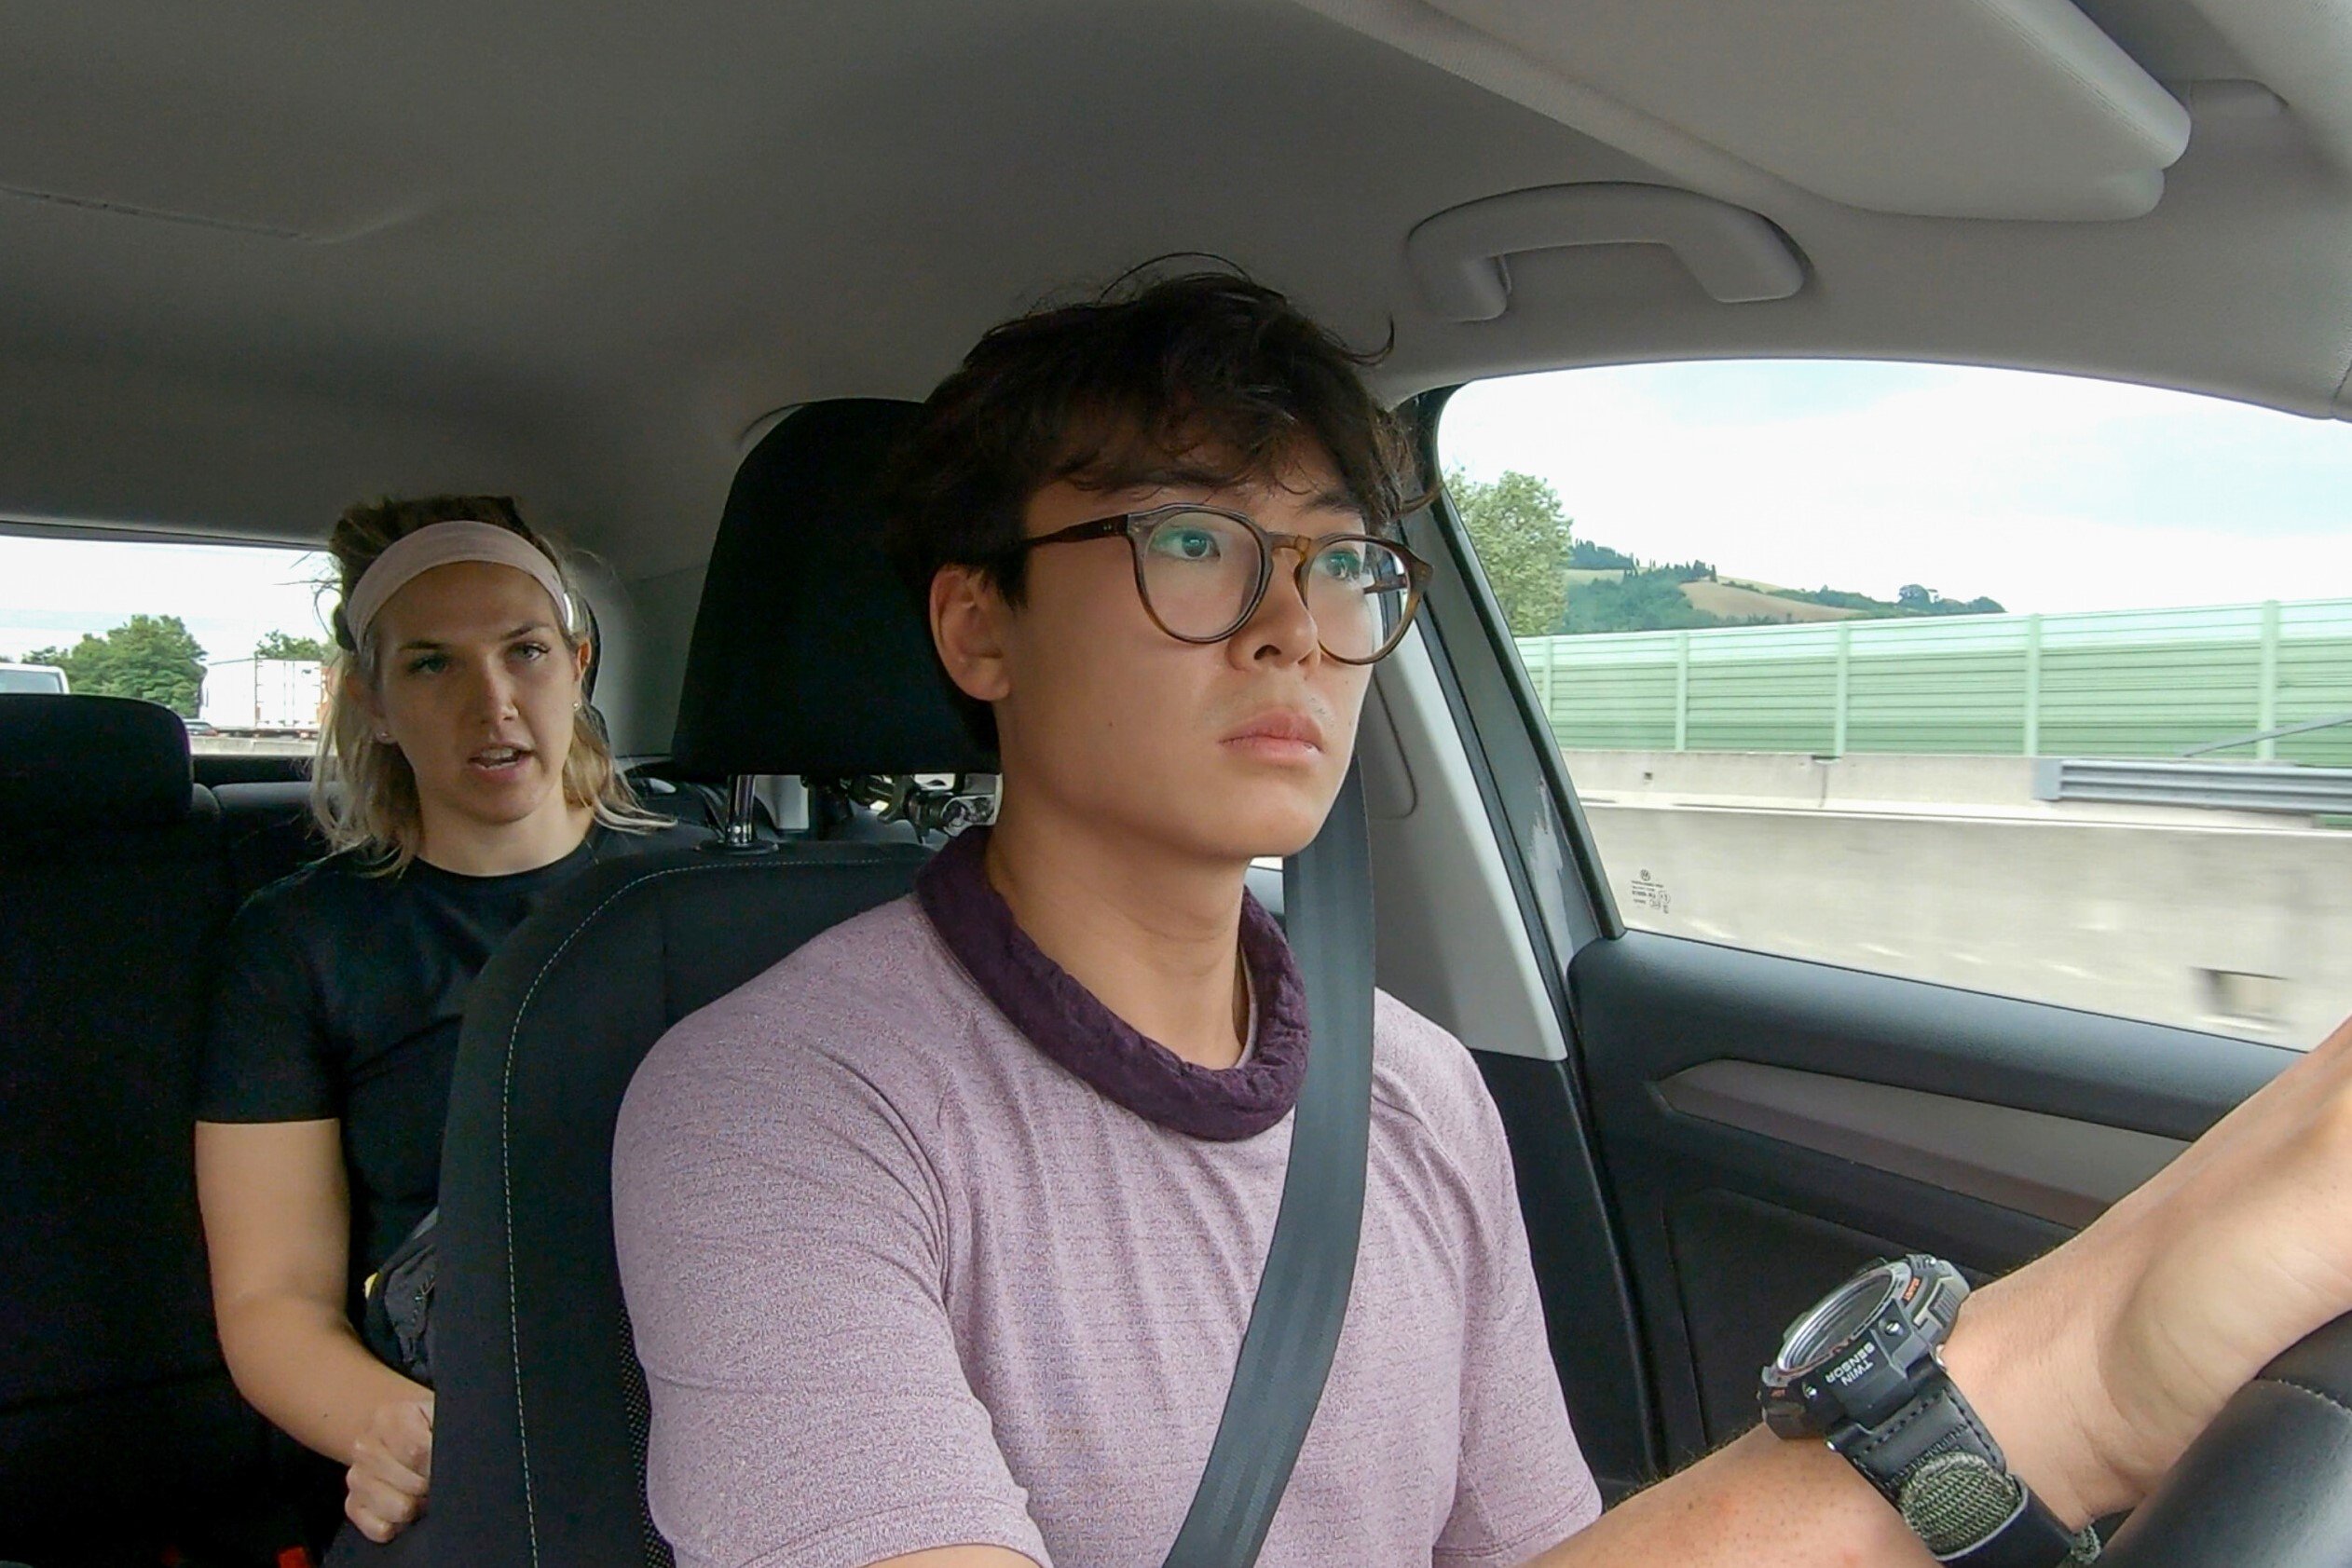 Claire Rehfuss and Derek Xiao, who star in 'The Amazing Race' Season 34, sit in a car with Derek in the driver's seat and Claire in the seat behind him. Claire wears a black shirt and light purple headband. Derek wears a light purple shirt and glasses.